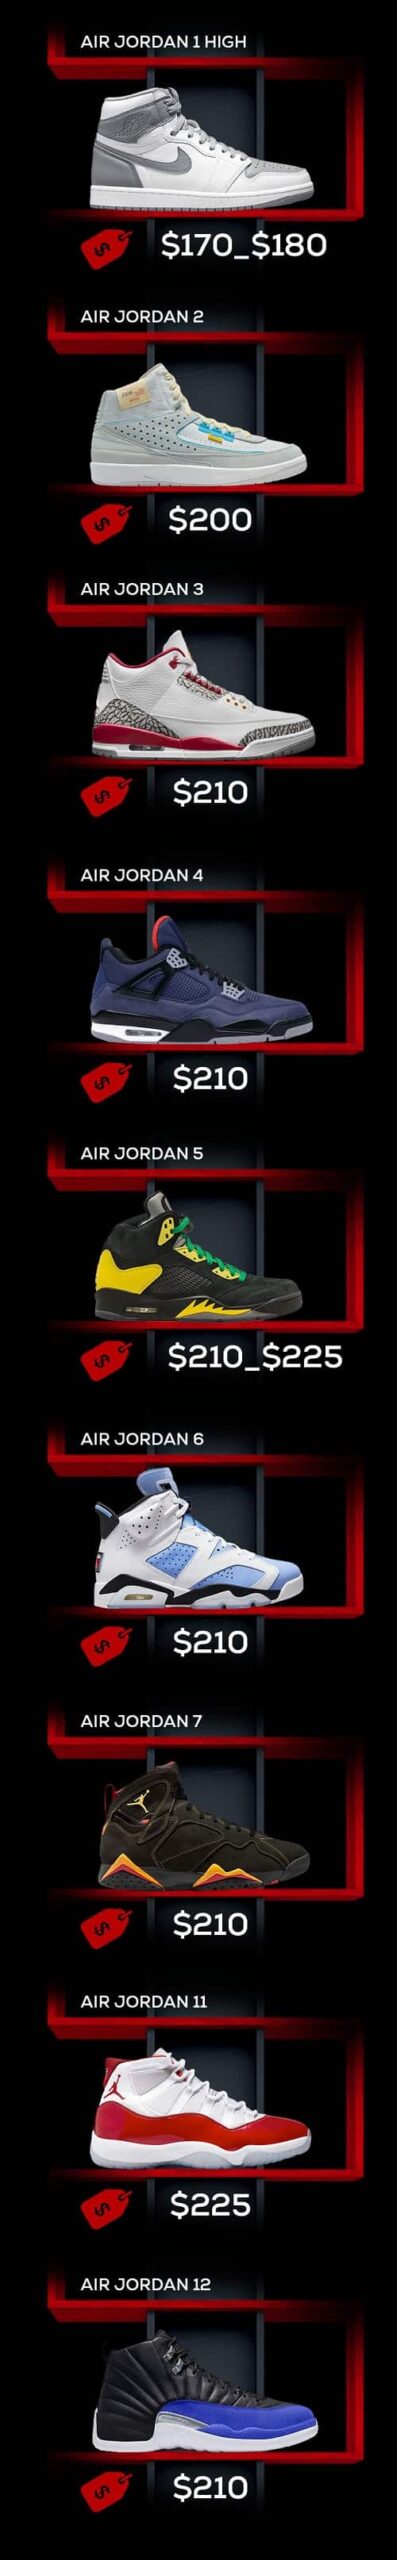 Air Jordan Prices Guide - How Much Are 